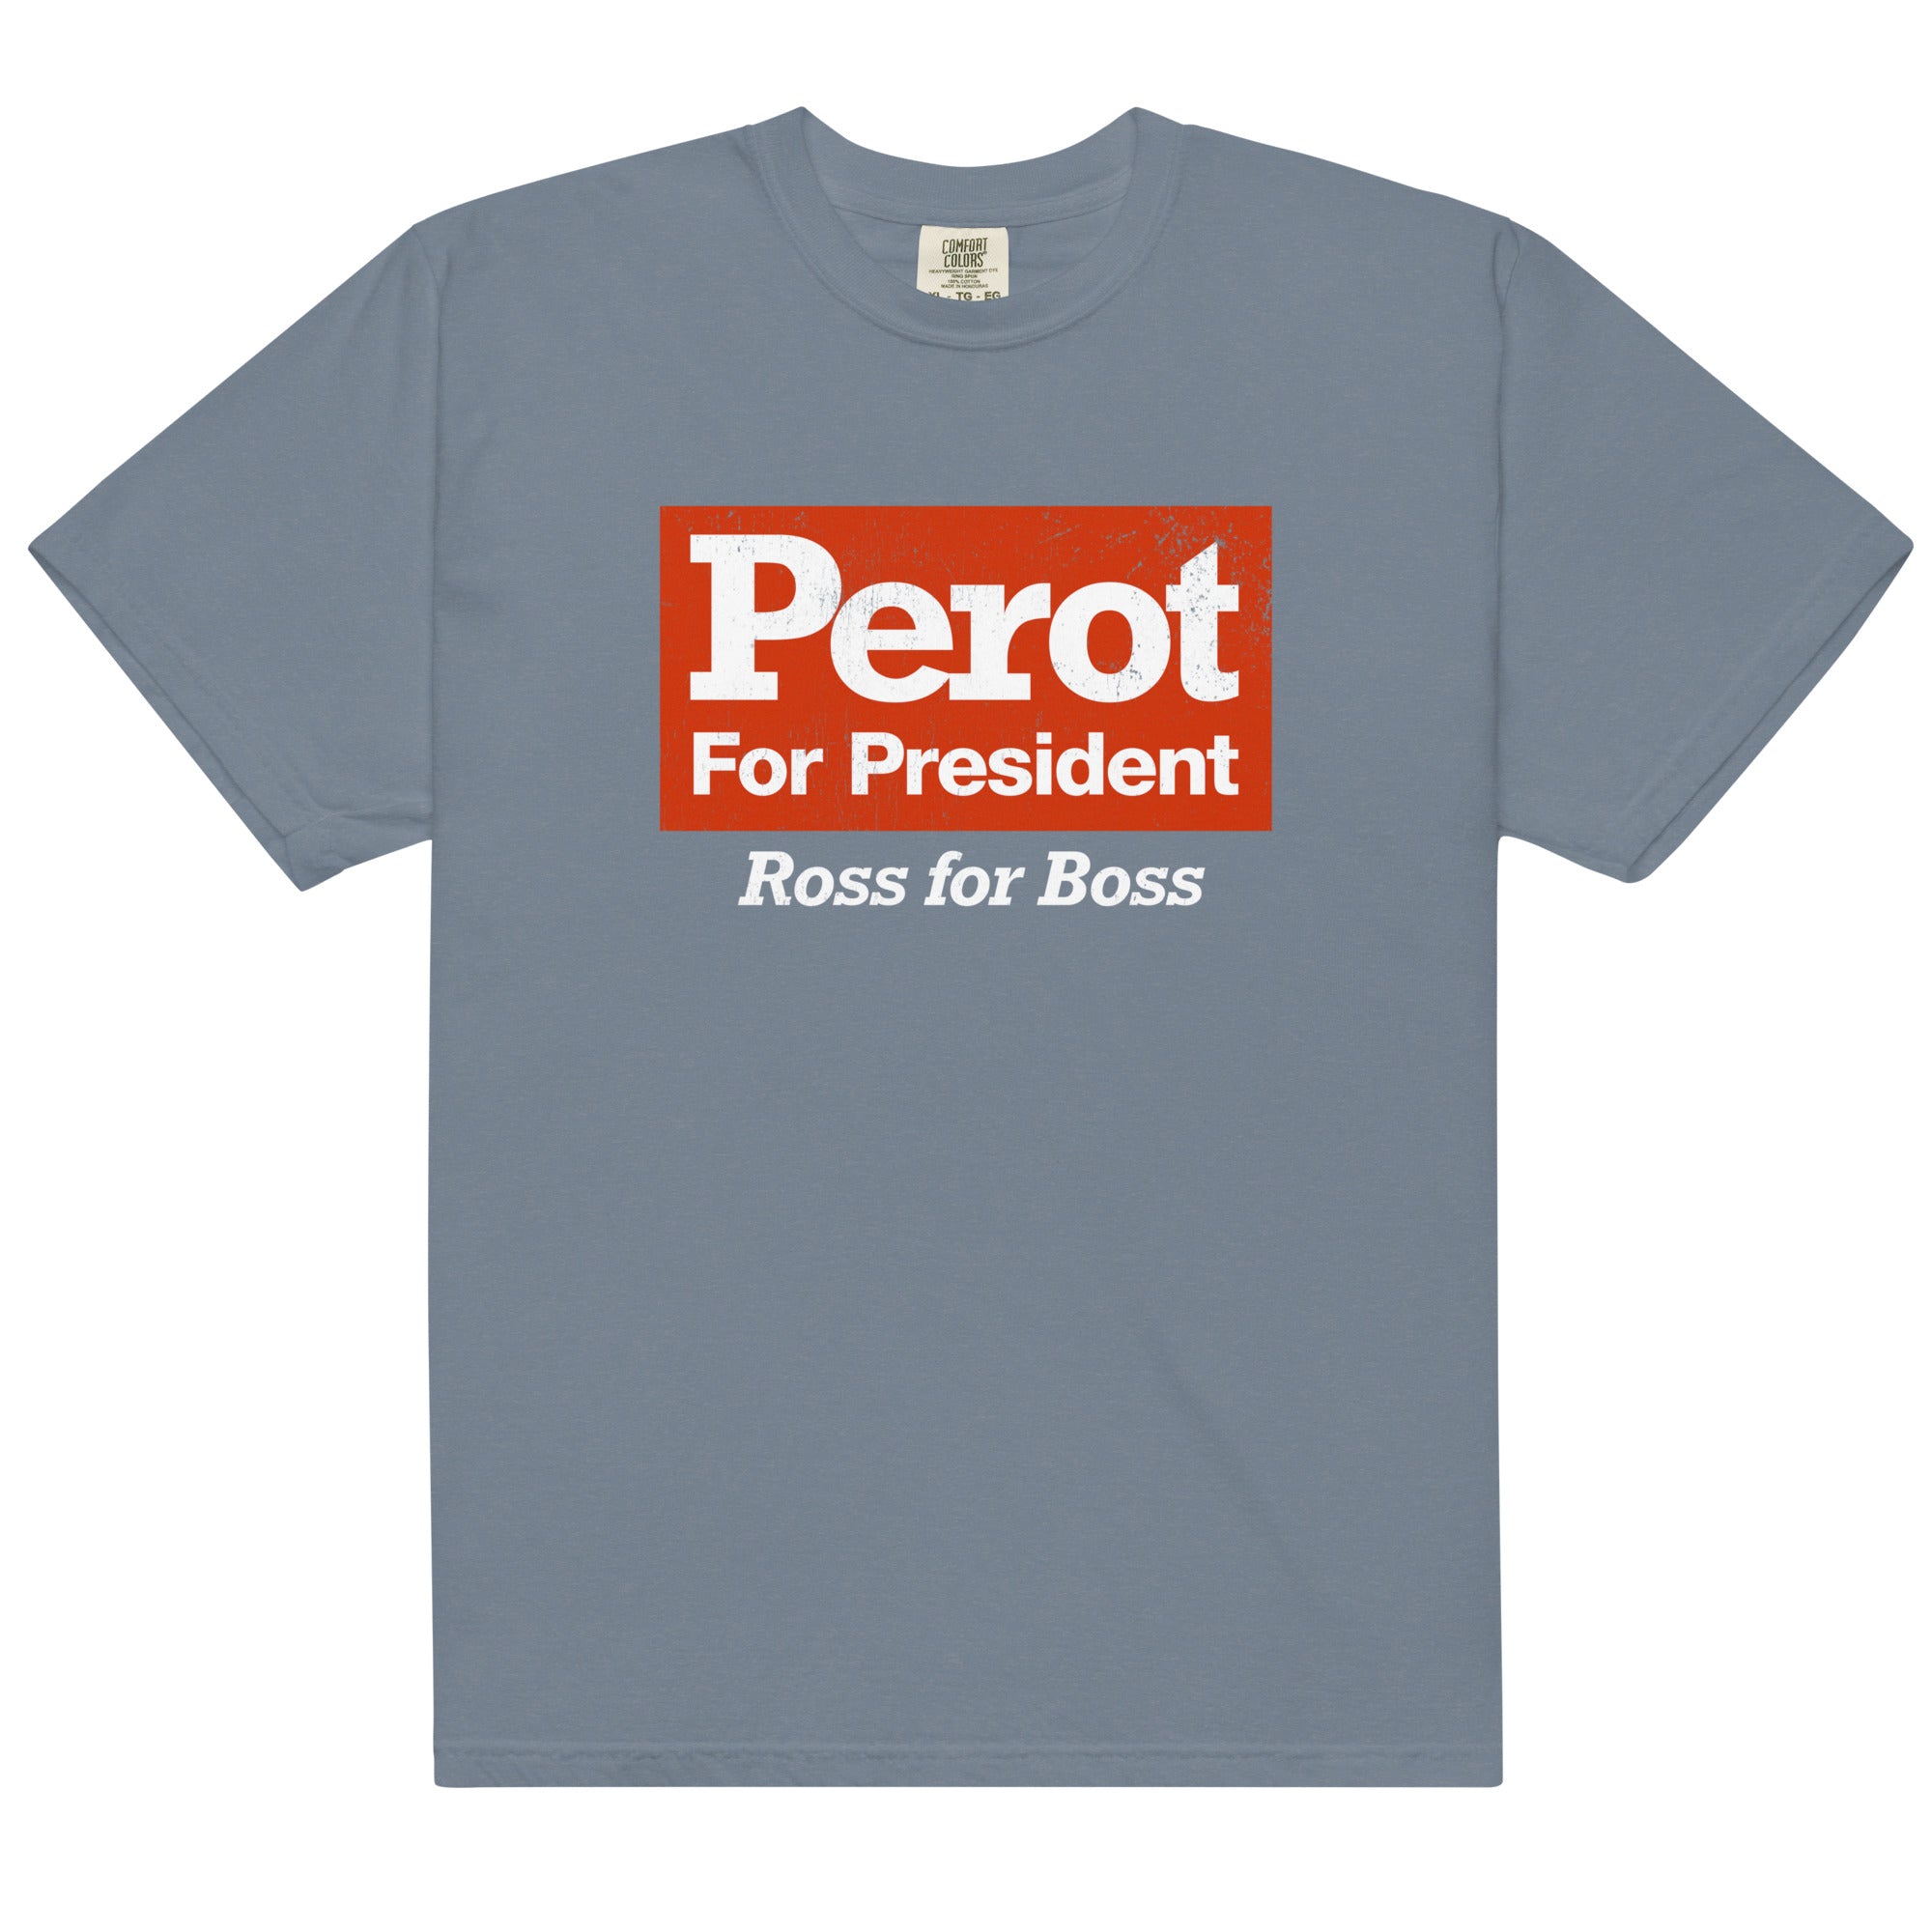 Ross Perot 1992 Campaign Reproduction Heavyweight Reproduction T-Shirt